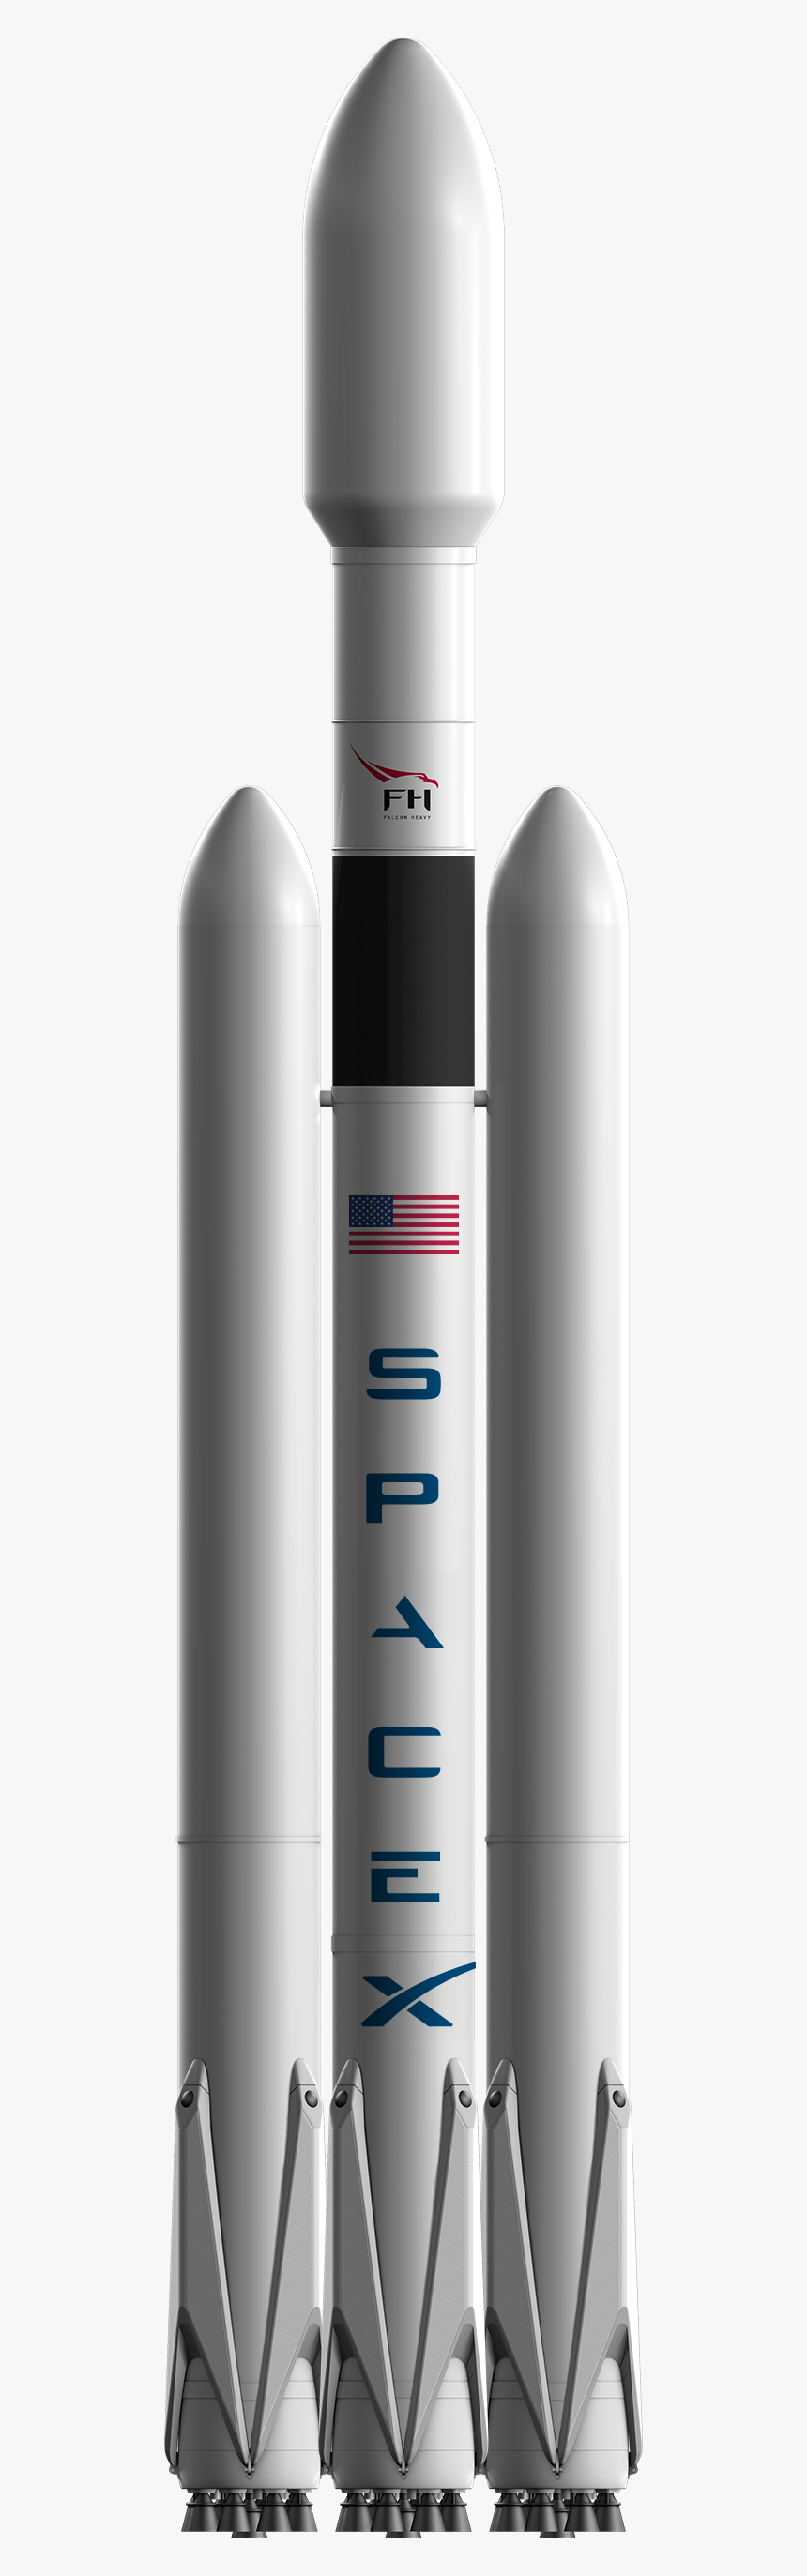 Falcon Heavy Rocket Png, Transparent Png, Free Download